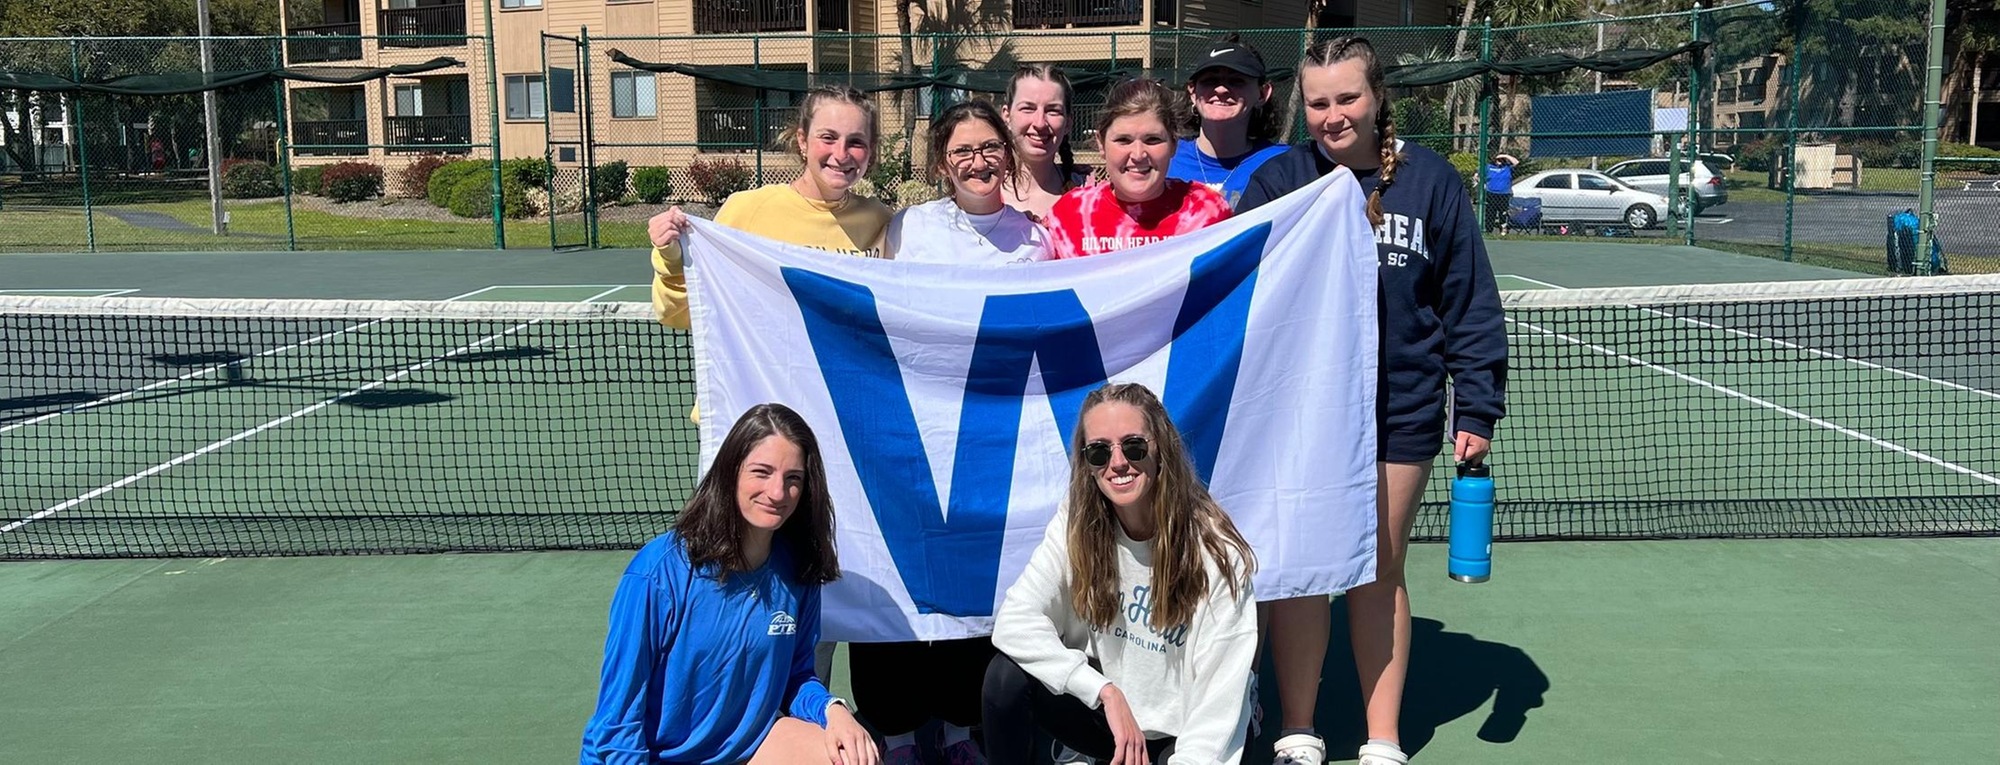 Women’s Tennis Dominates With Four Convincing Wins in Hilton Head 